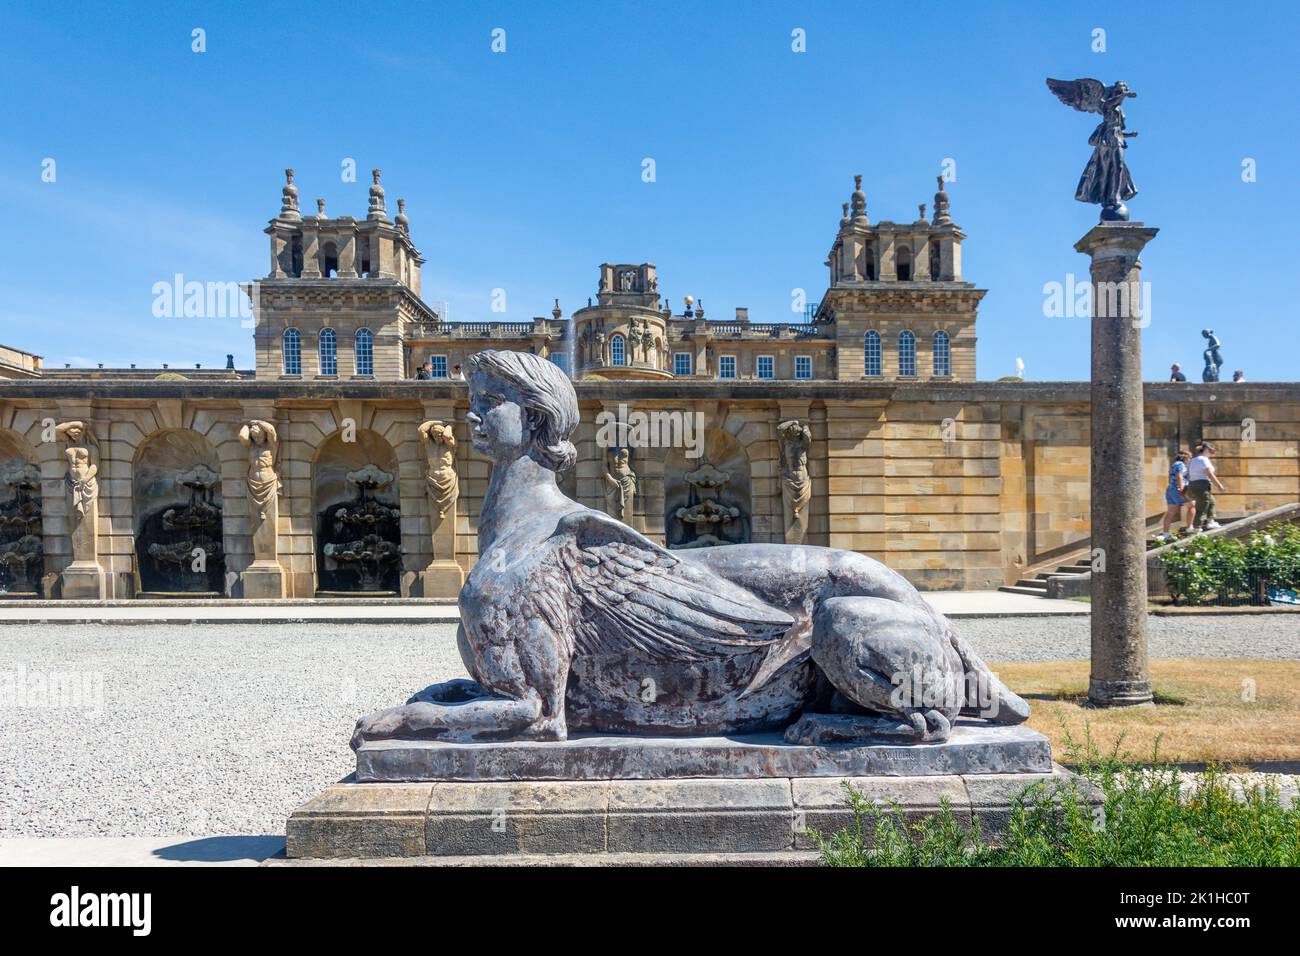 View of Palace from The Water Gardens, Blenheim Palace, Woodstock, Oxfordshire, England, United Kingdom Stock Photo